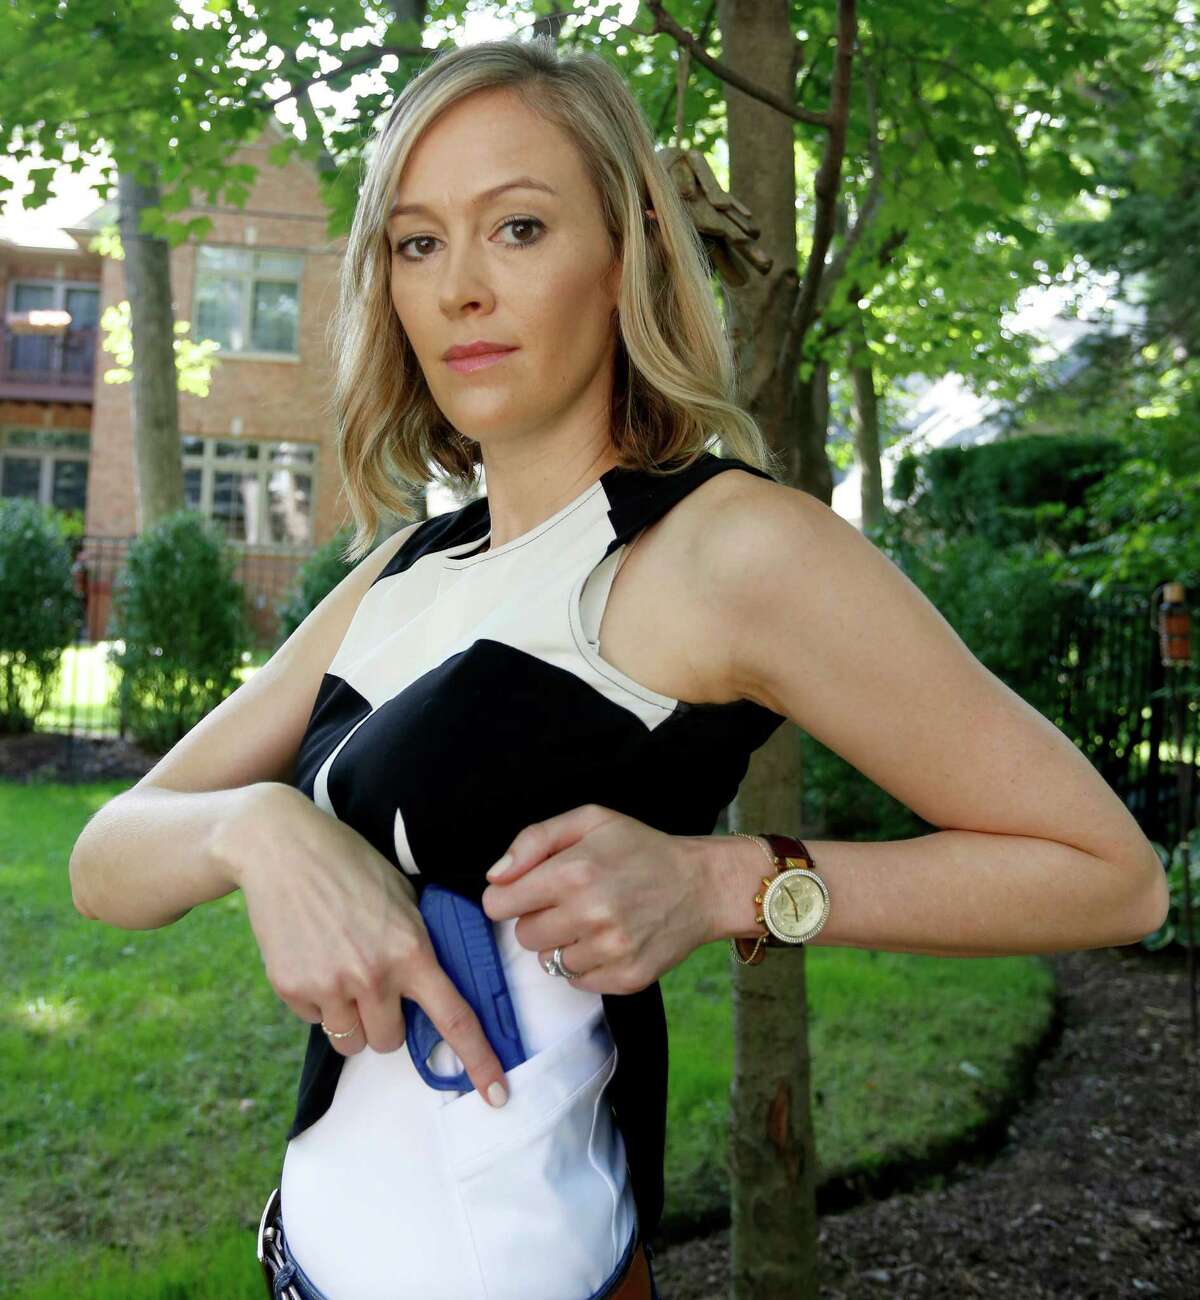 In this Aug. 29, 2016 photo, Marilyn Smolenski uses a mock gun to demonstrate how to pull a handgun out of an undergarment she designs for concealed carry at her home in Park Ridge, Ill. Interest in clothing that allow women to carry a firearm concealed is rising. Pioneers in the industry say they allow women to avoid looking frumpy and still carry a firearm safely and effectively. (AP Photo/Tae-Gyun Kim)